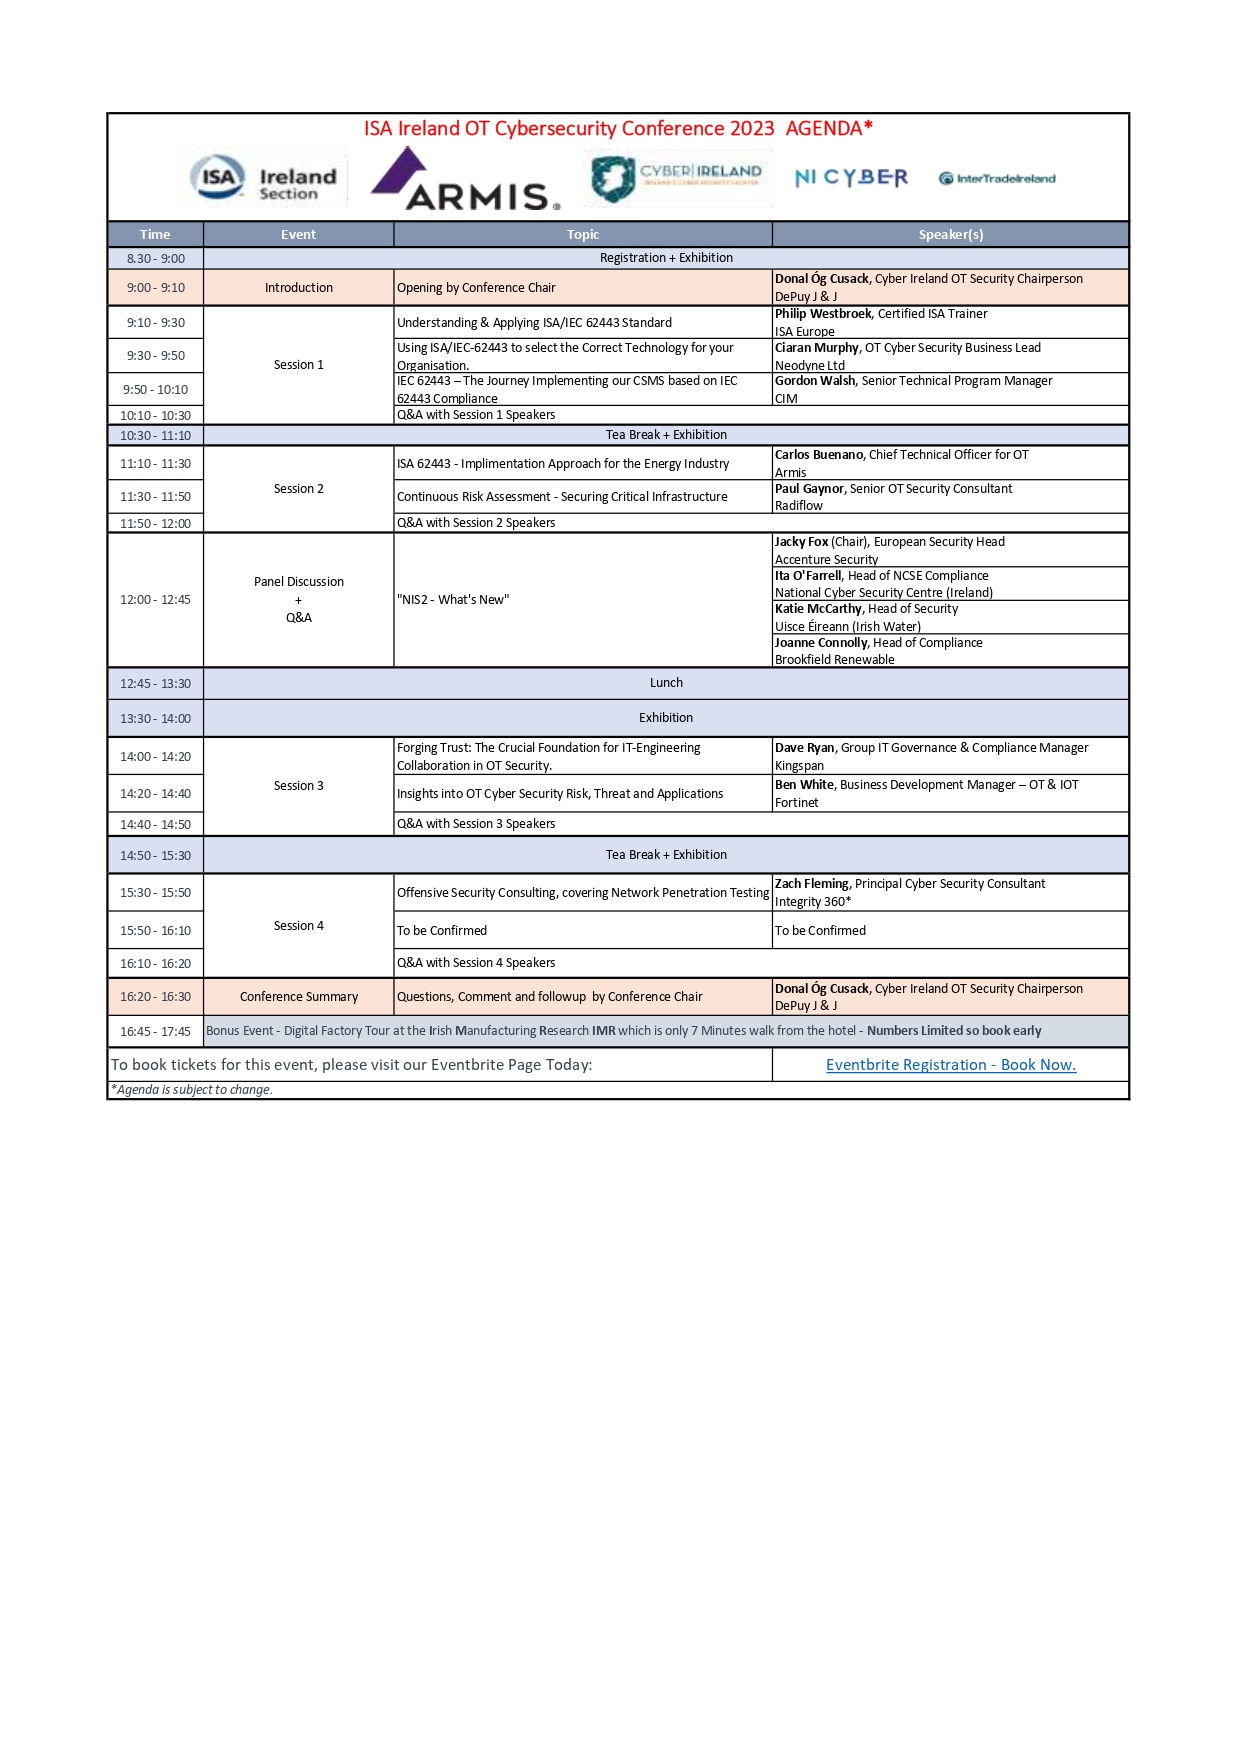 ISA-Cybersecurity-Con-2023-Agenda (1)_page-0001